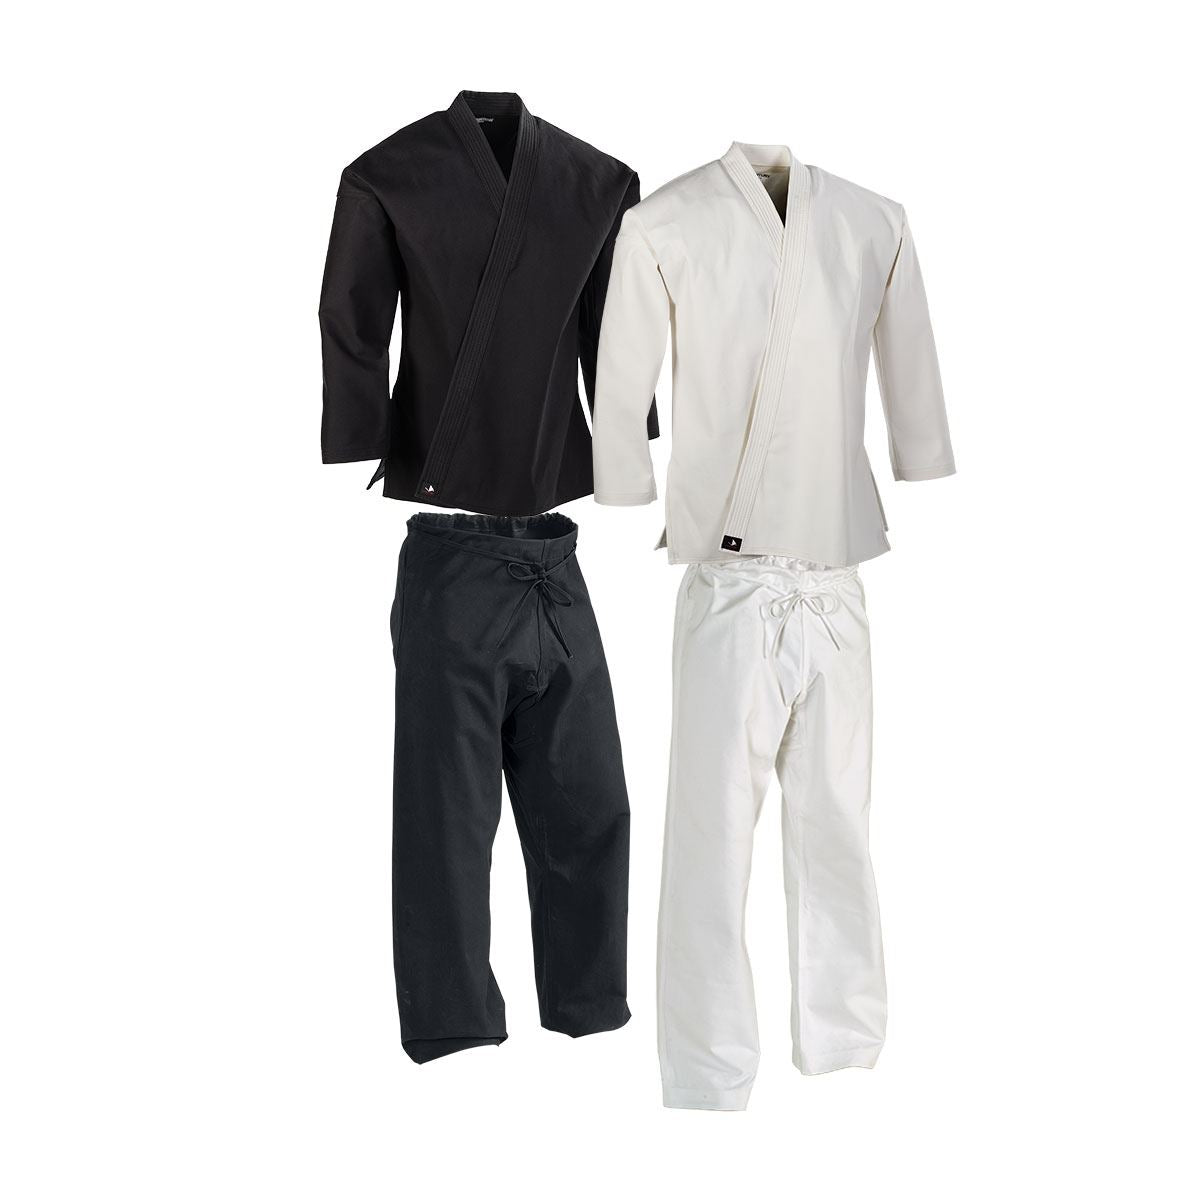 12 oz. Heavyweight Brushed Cotton Uniform both sets shown one in black and one in white